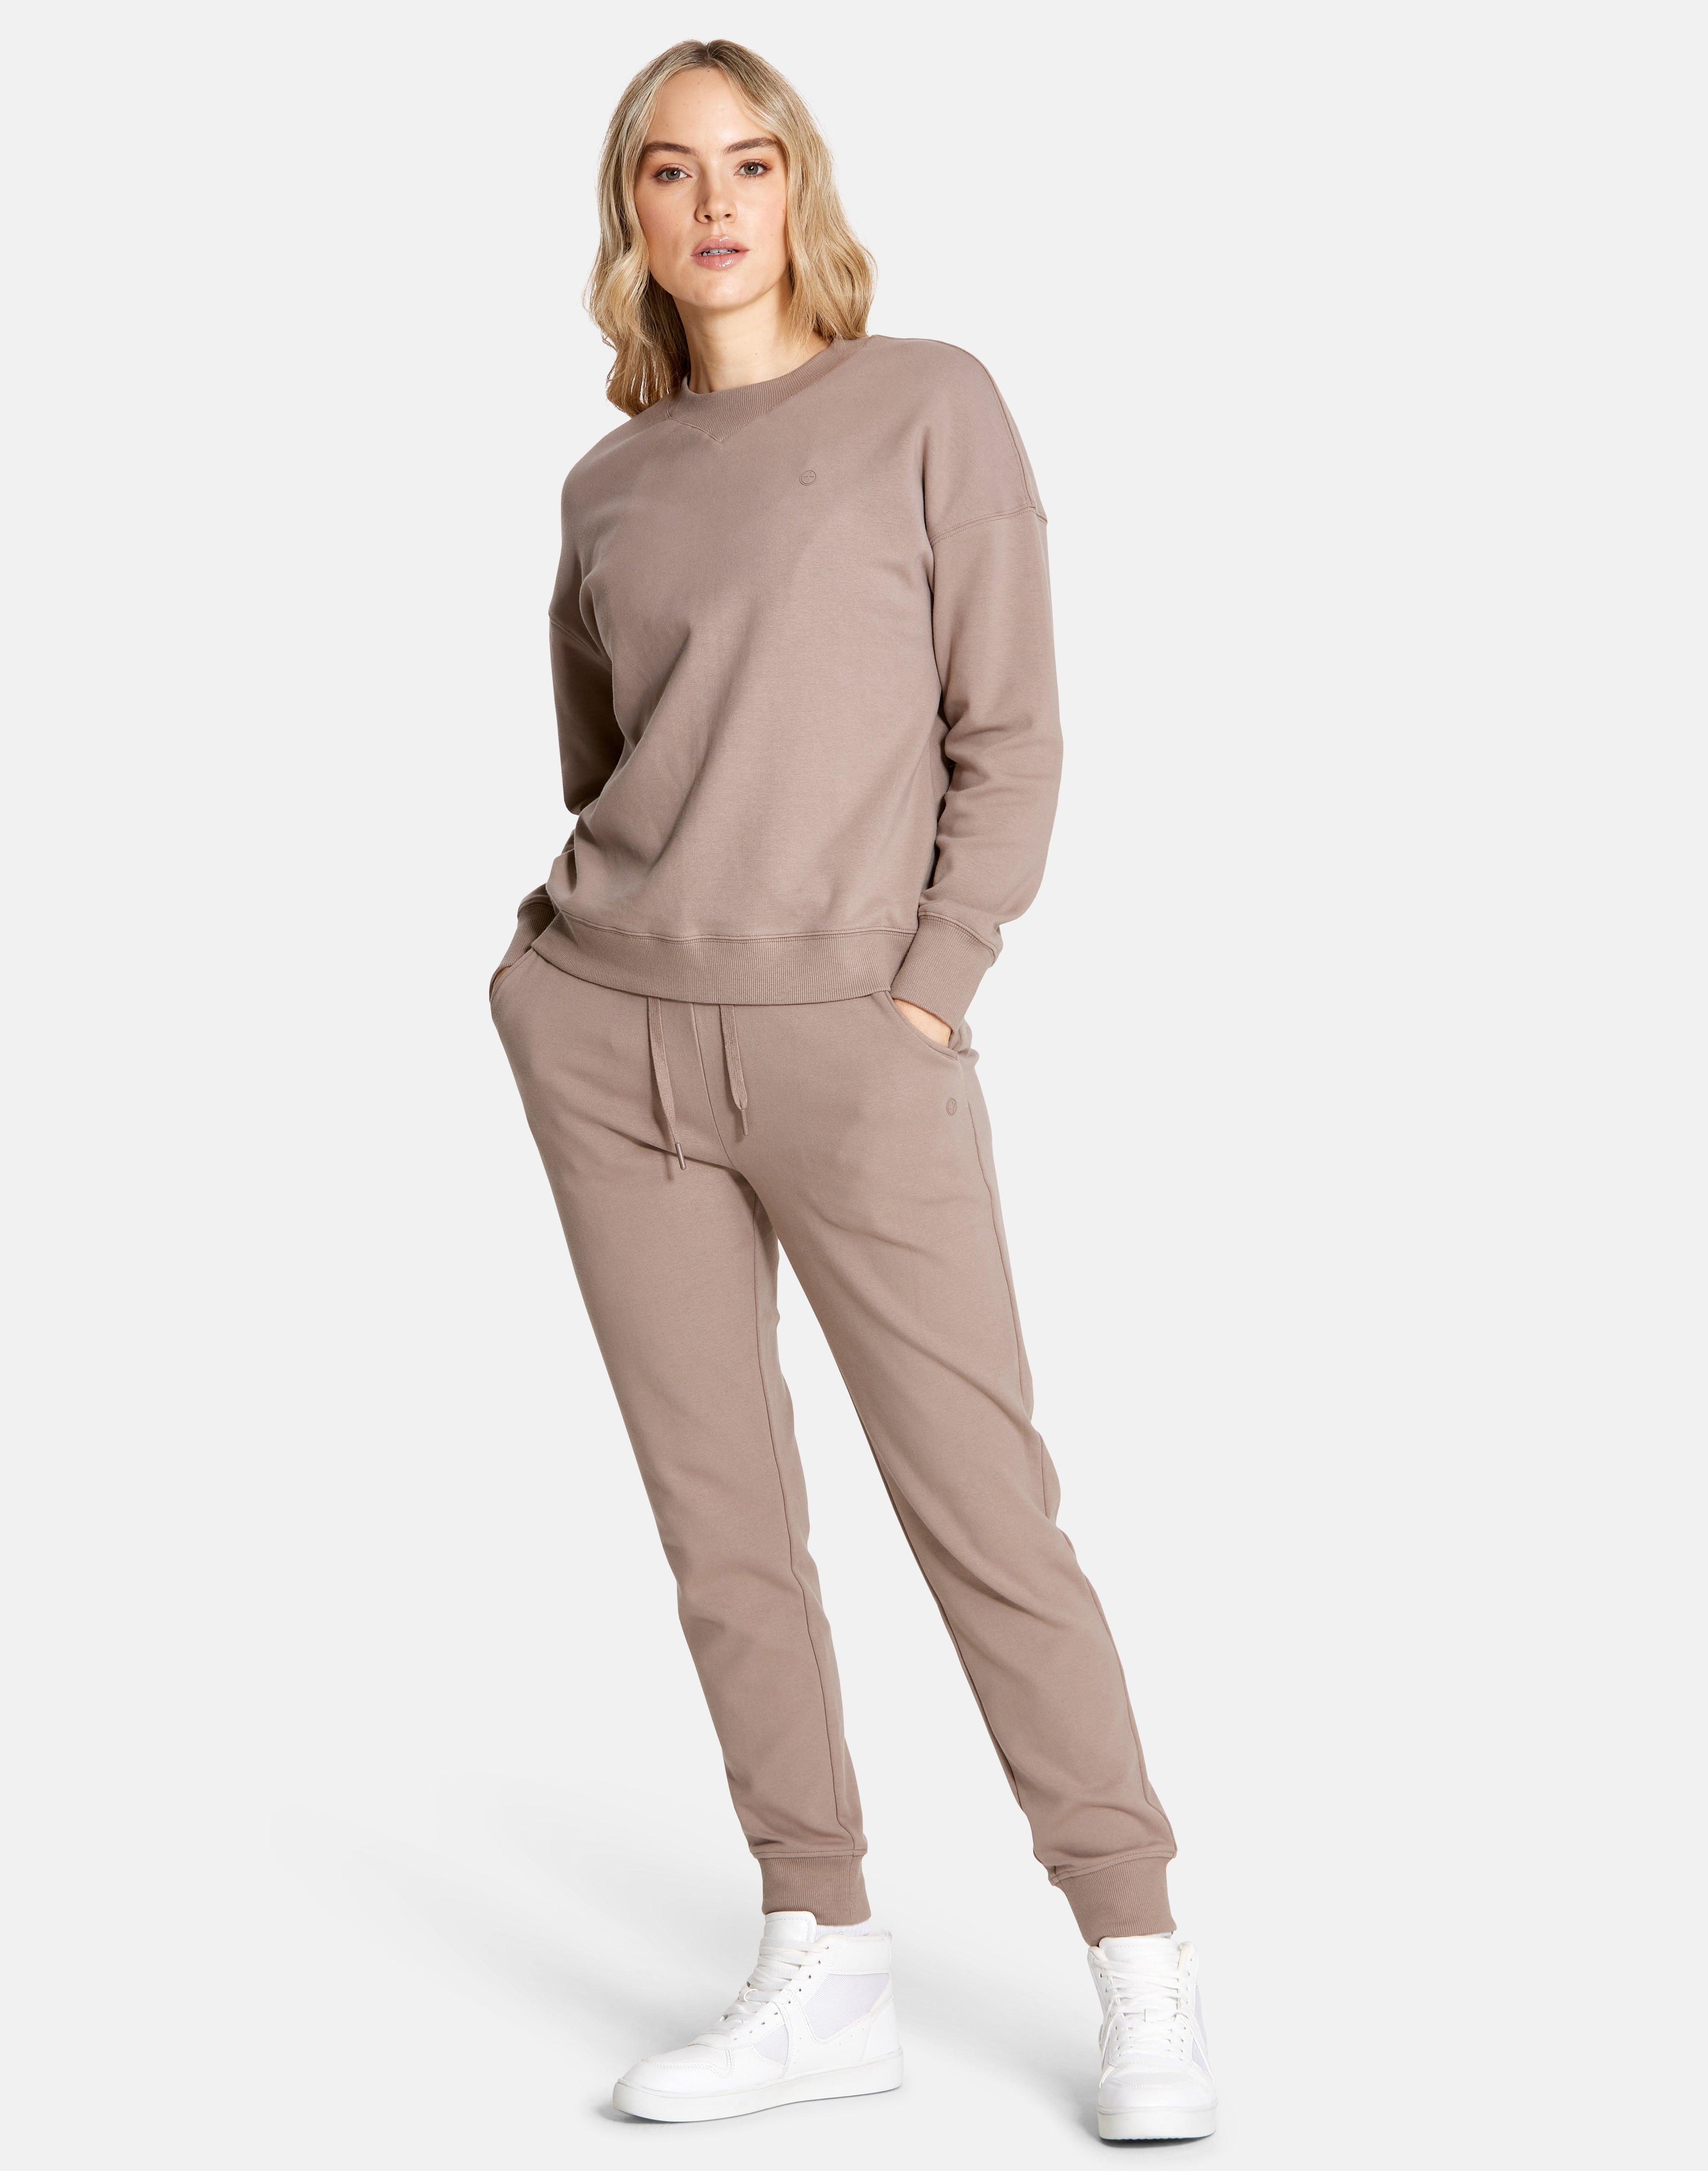 Chill Track Jogger 2.0 in Powder Clay - Joggers - Gym+Coffee